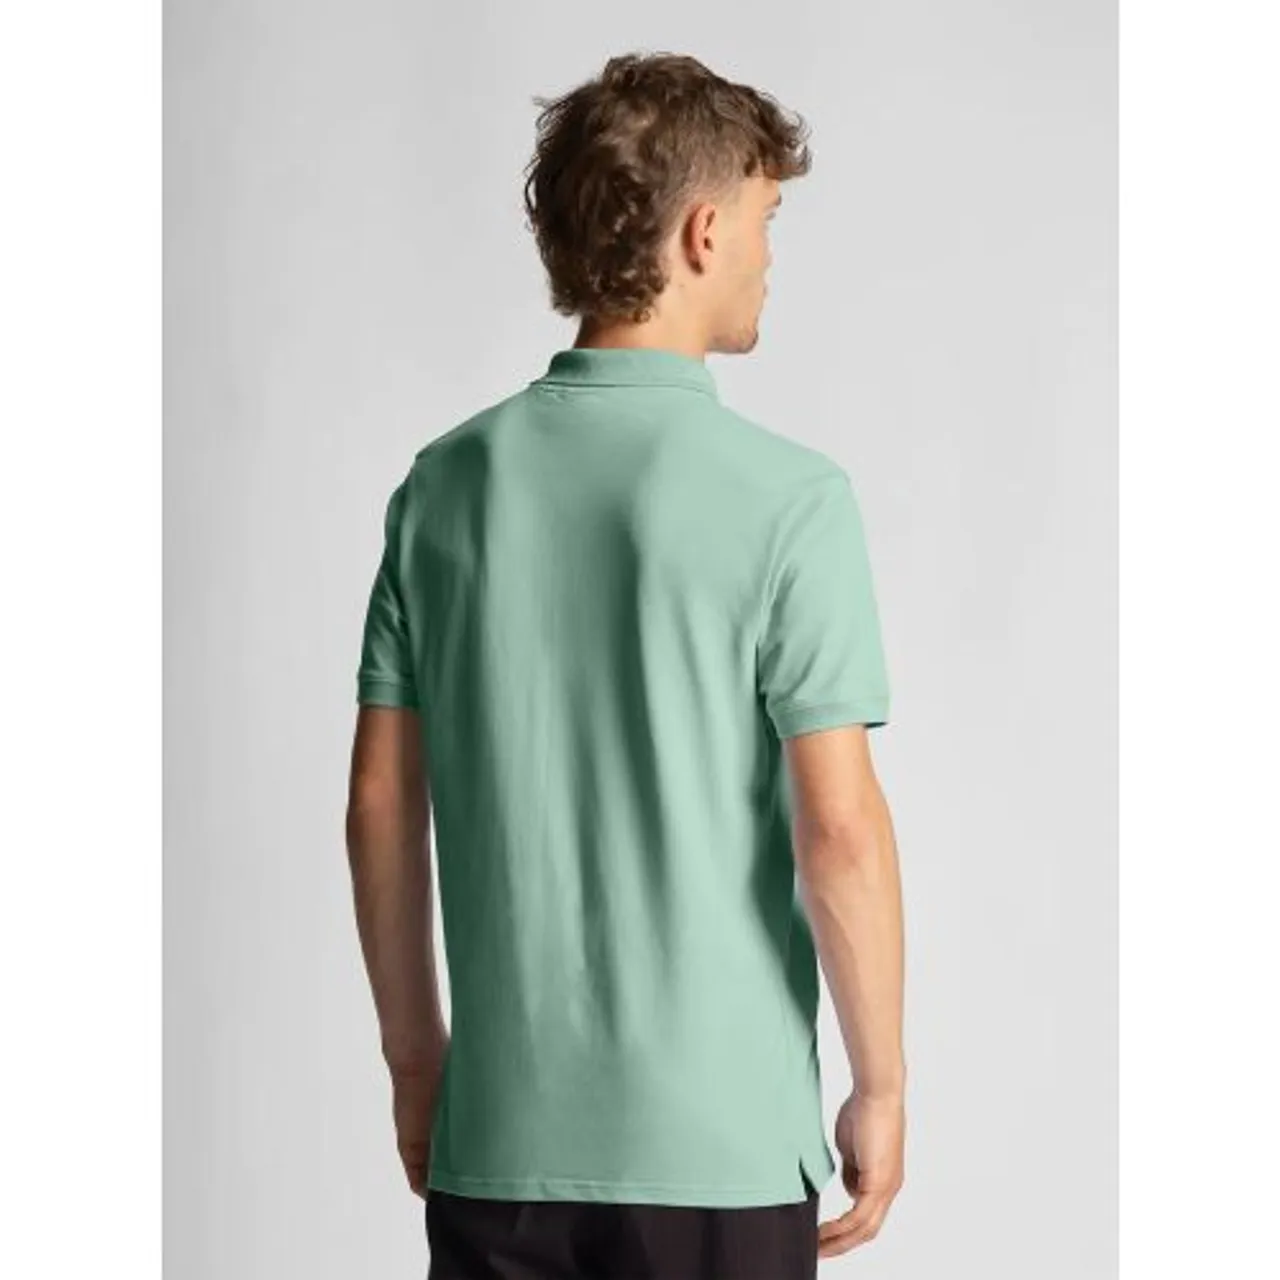 Lyle and Scott Mens Turquoise Shadow Plain Polo Shirt